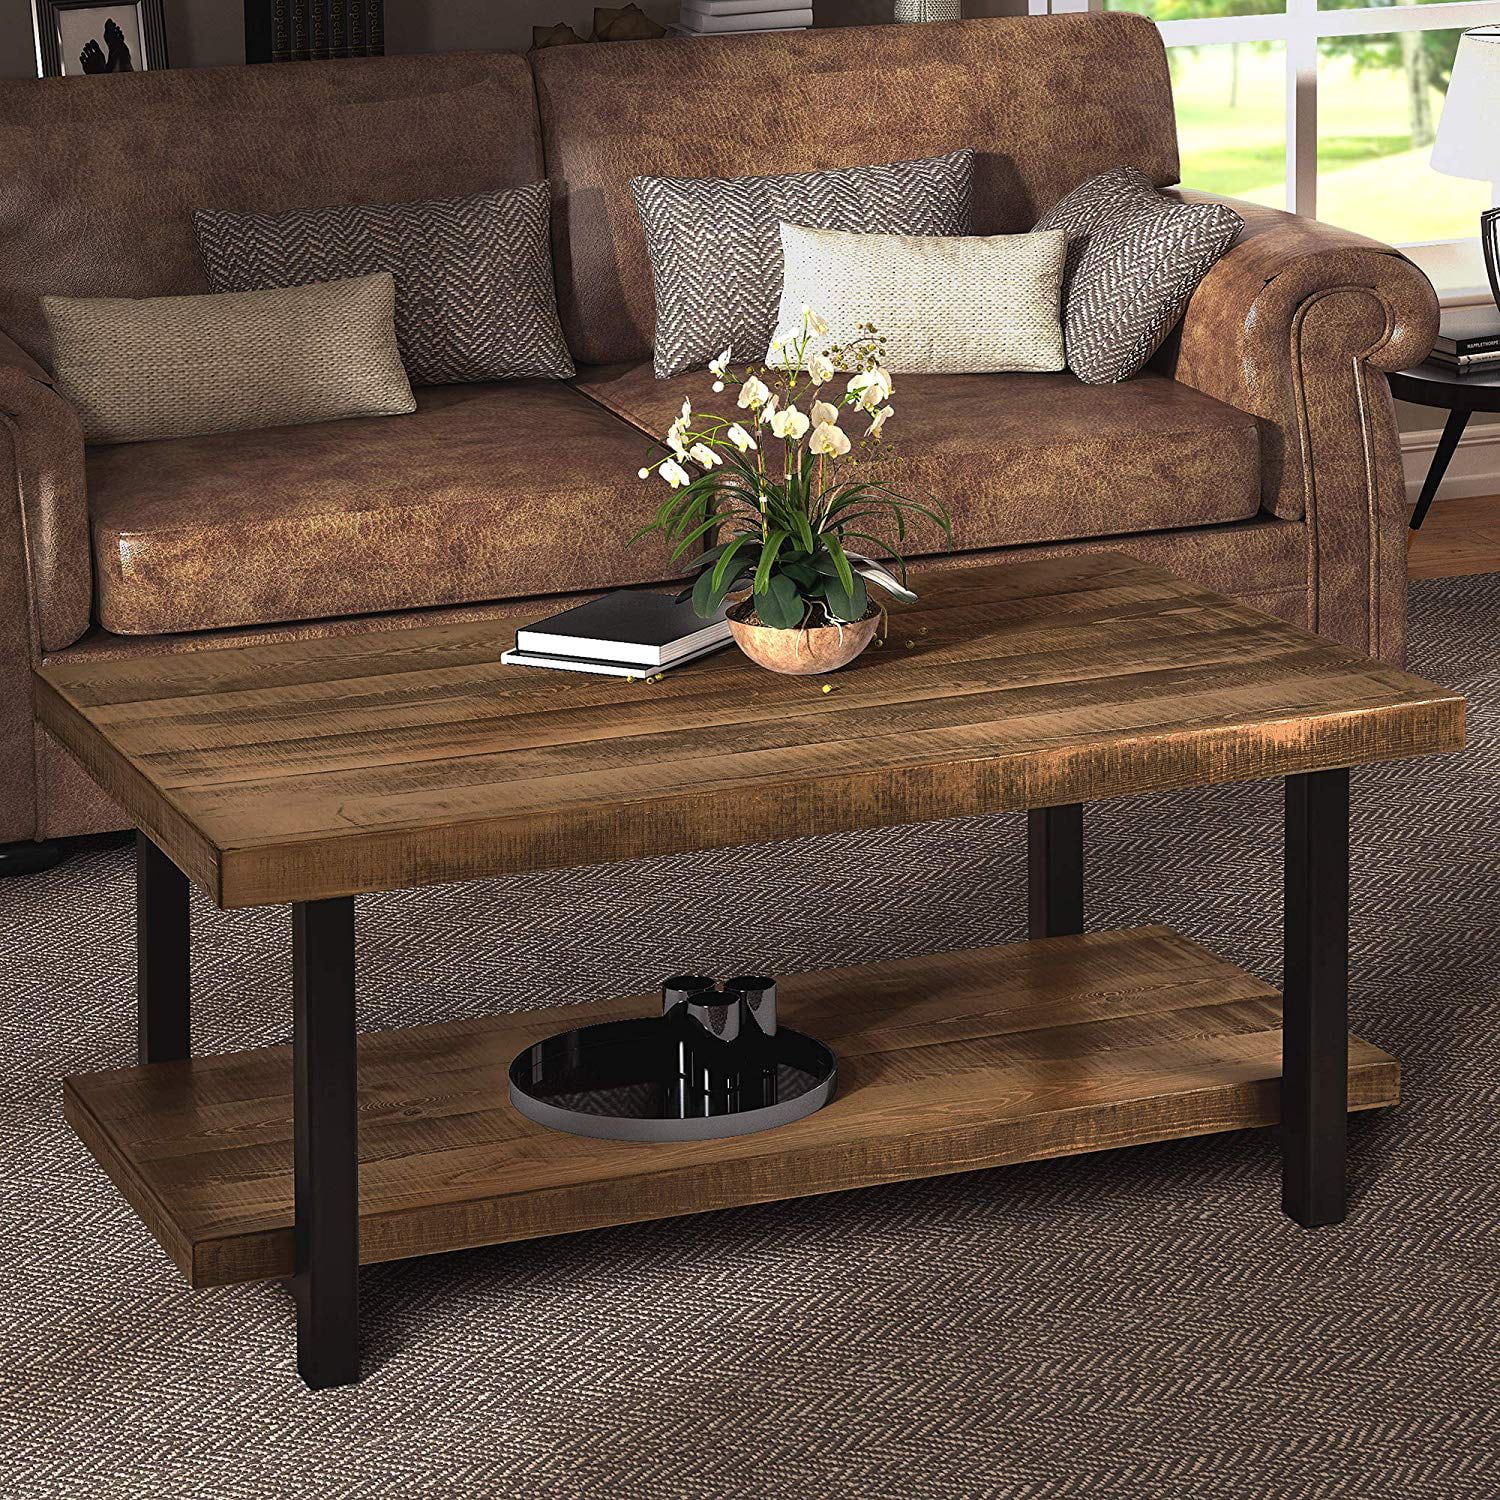 Harper&bright Designs Industrial Rectangular Pine Wood Coffee Table In Rustic Wood Coffee Tables (Photo 8 of 15)